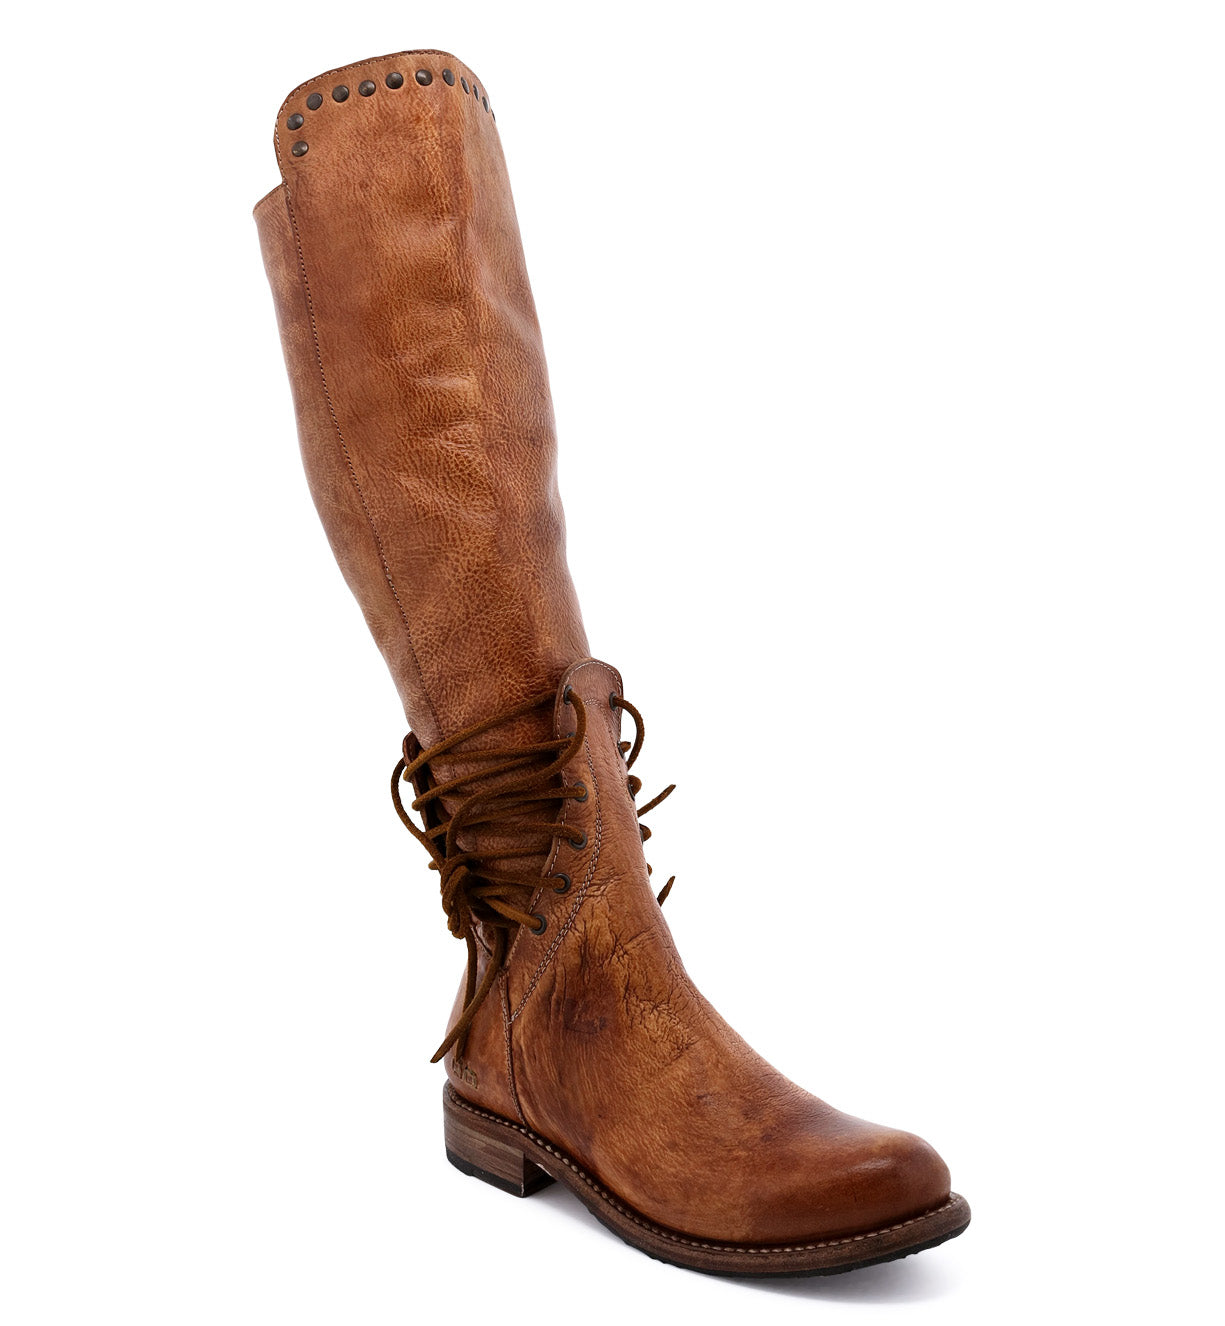 A women's Bed Stu Loxley brown leather boot with laces.